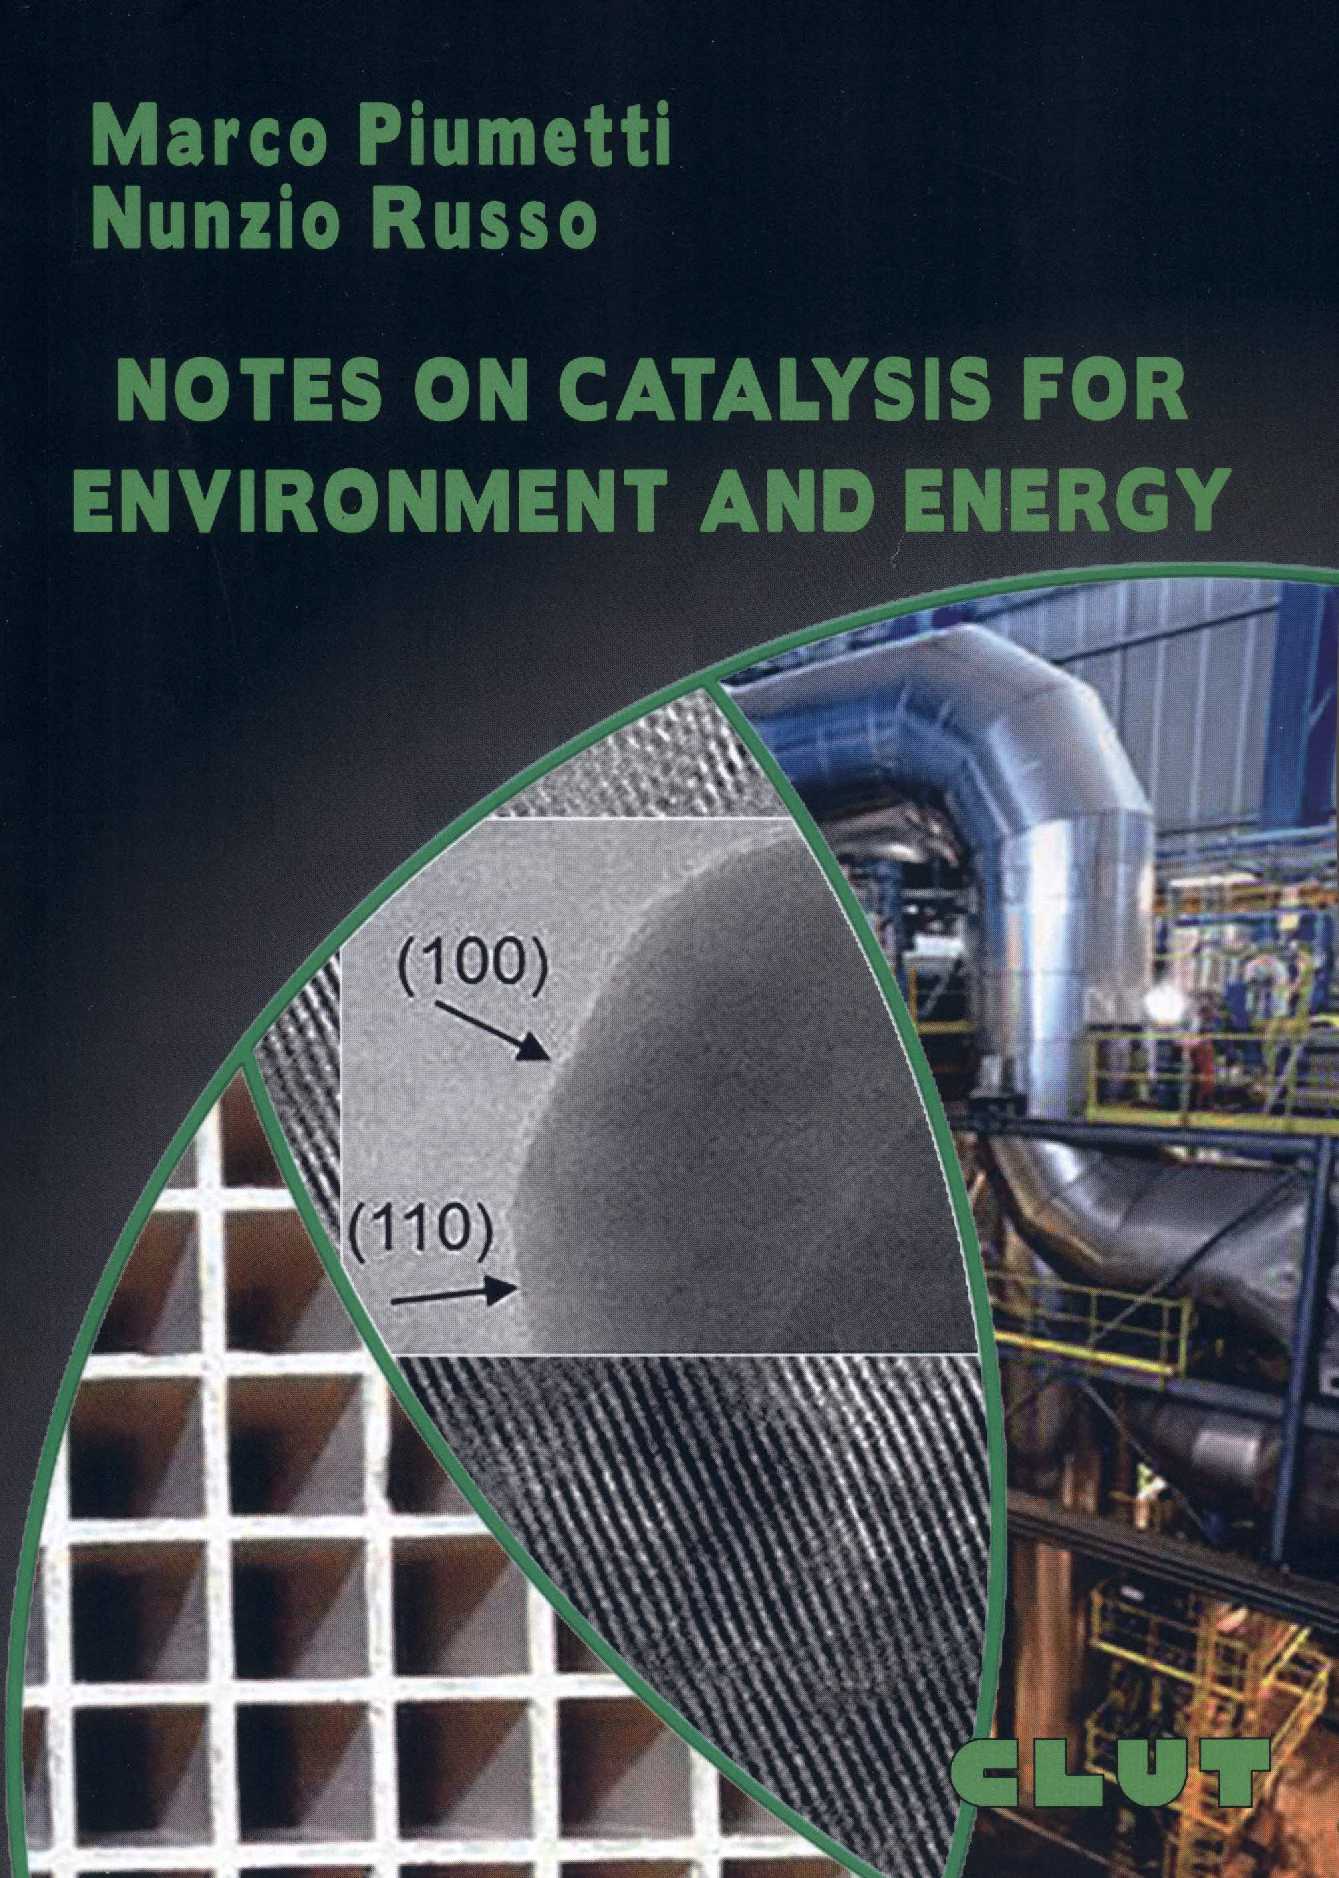 NOTES ON CATALYSIS FOR ENVIRONMENT AND ENERGY